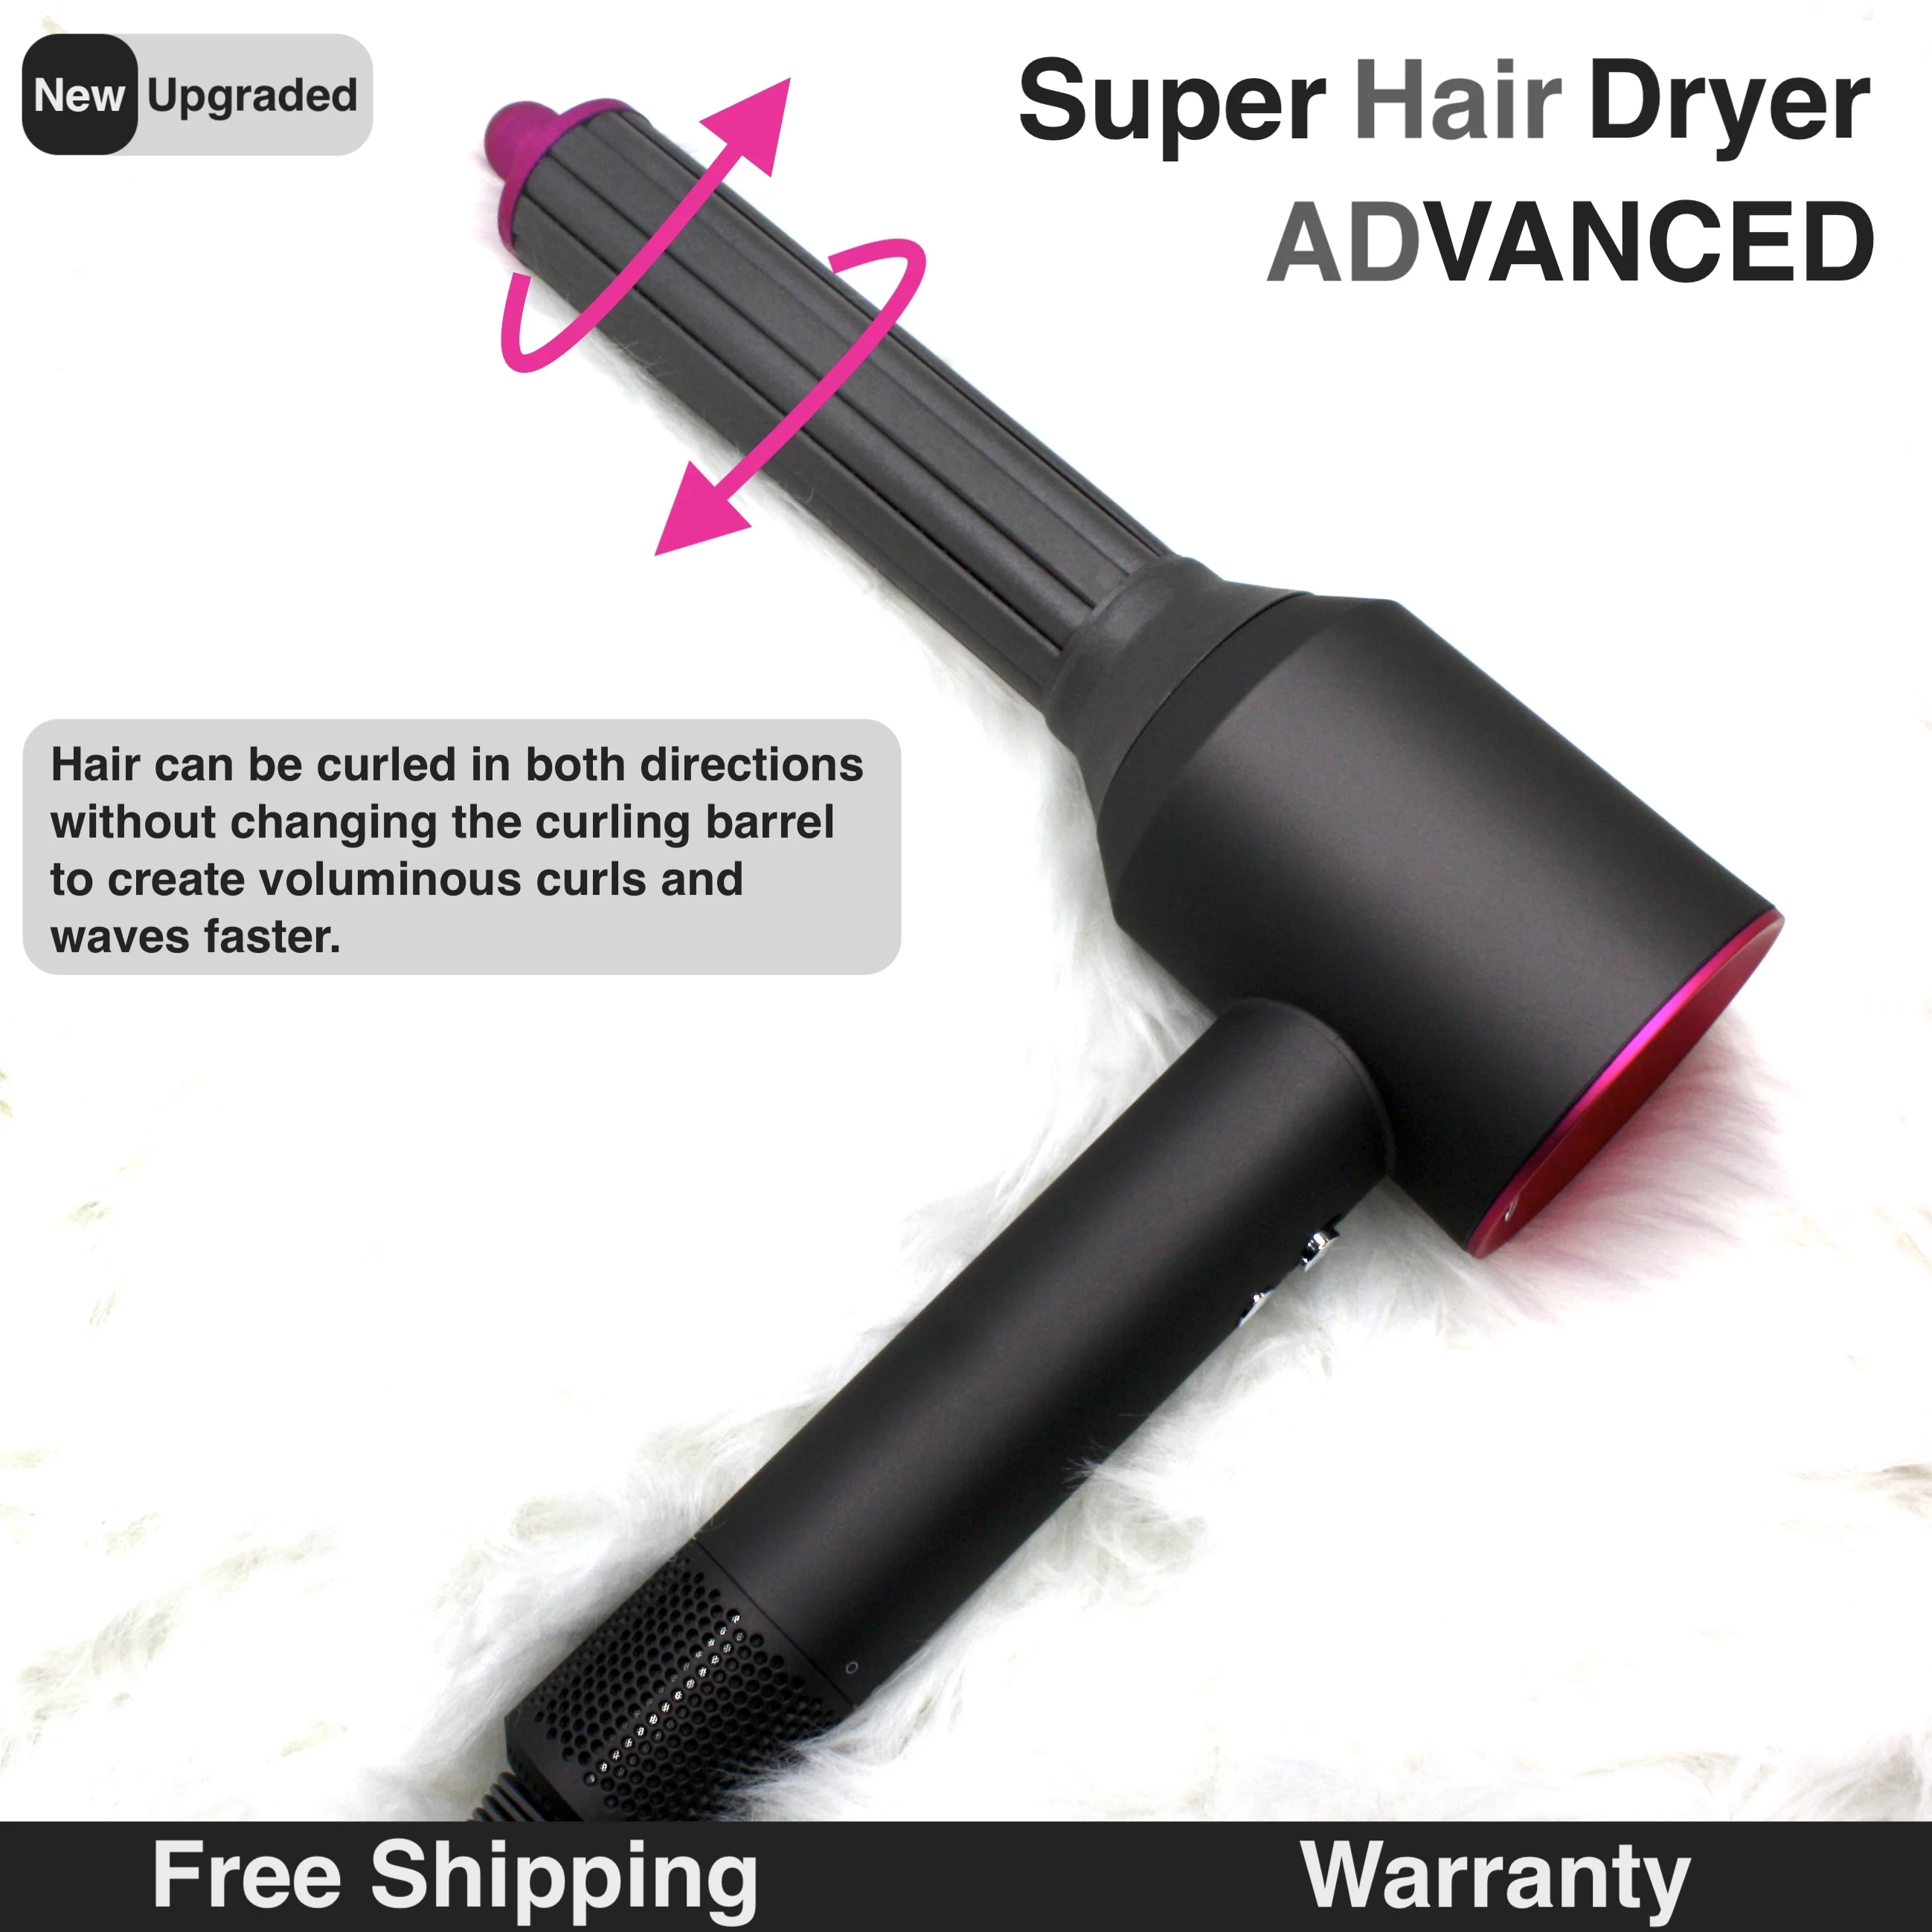 New Curling Nozzle For Dyson Hair Dryer Attachment Curling Nozzle For Super Hair Dryer Attachments